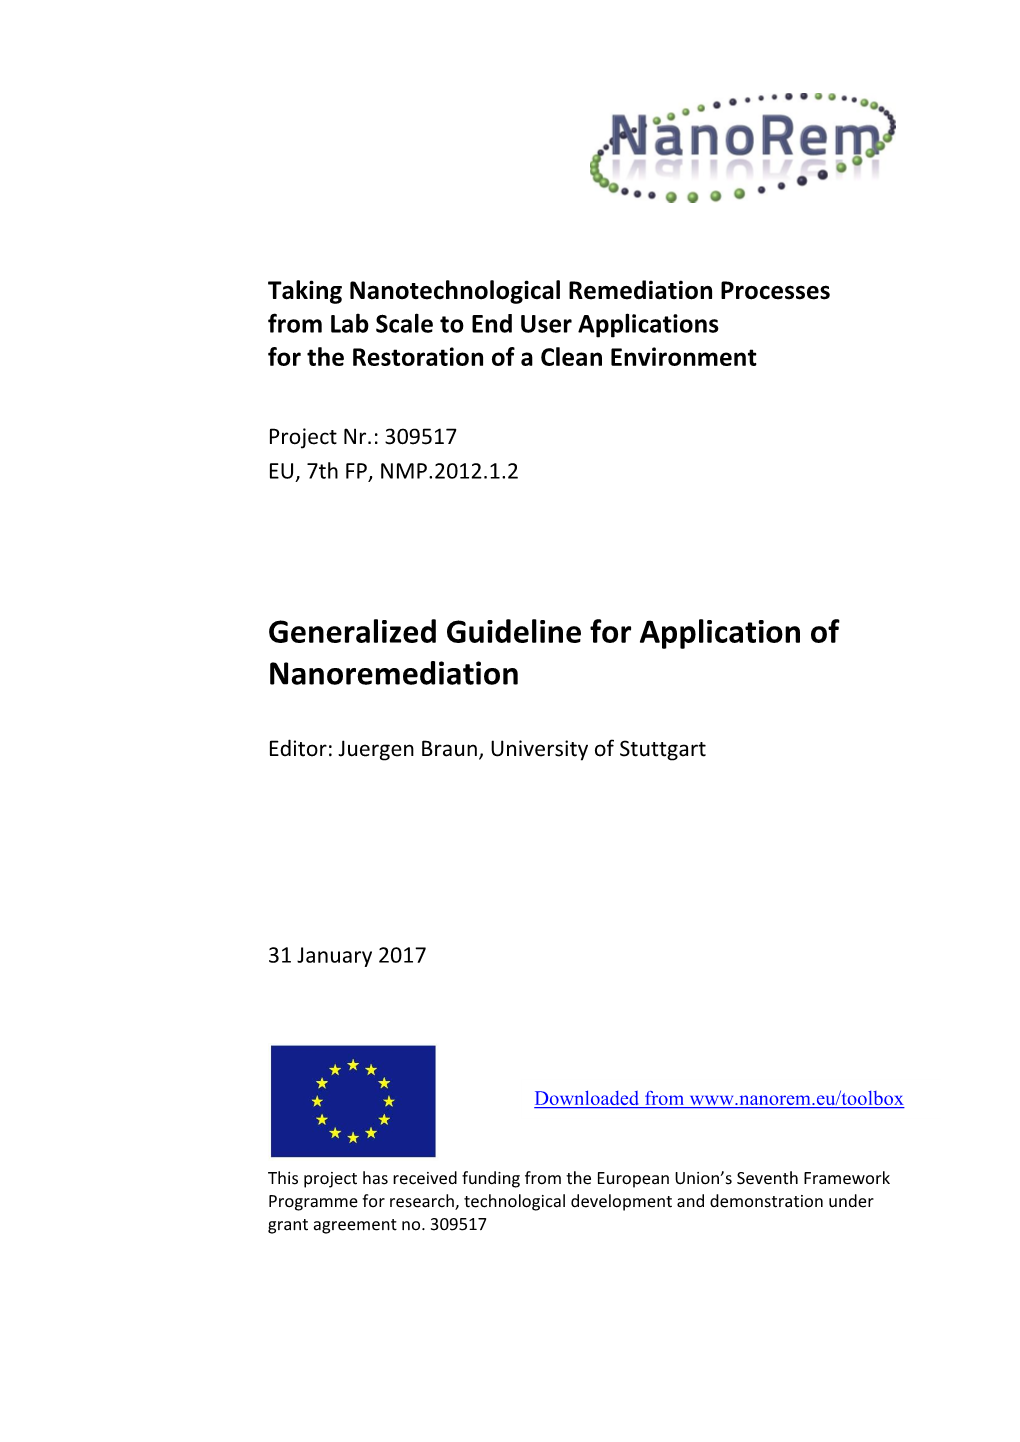 Generalized Guideline for Application of Nanoremediation